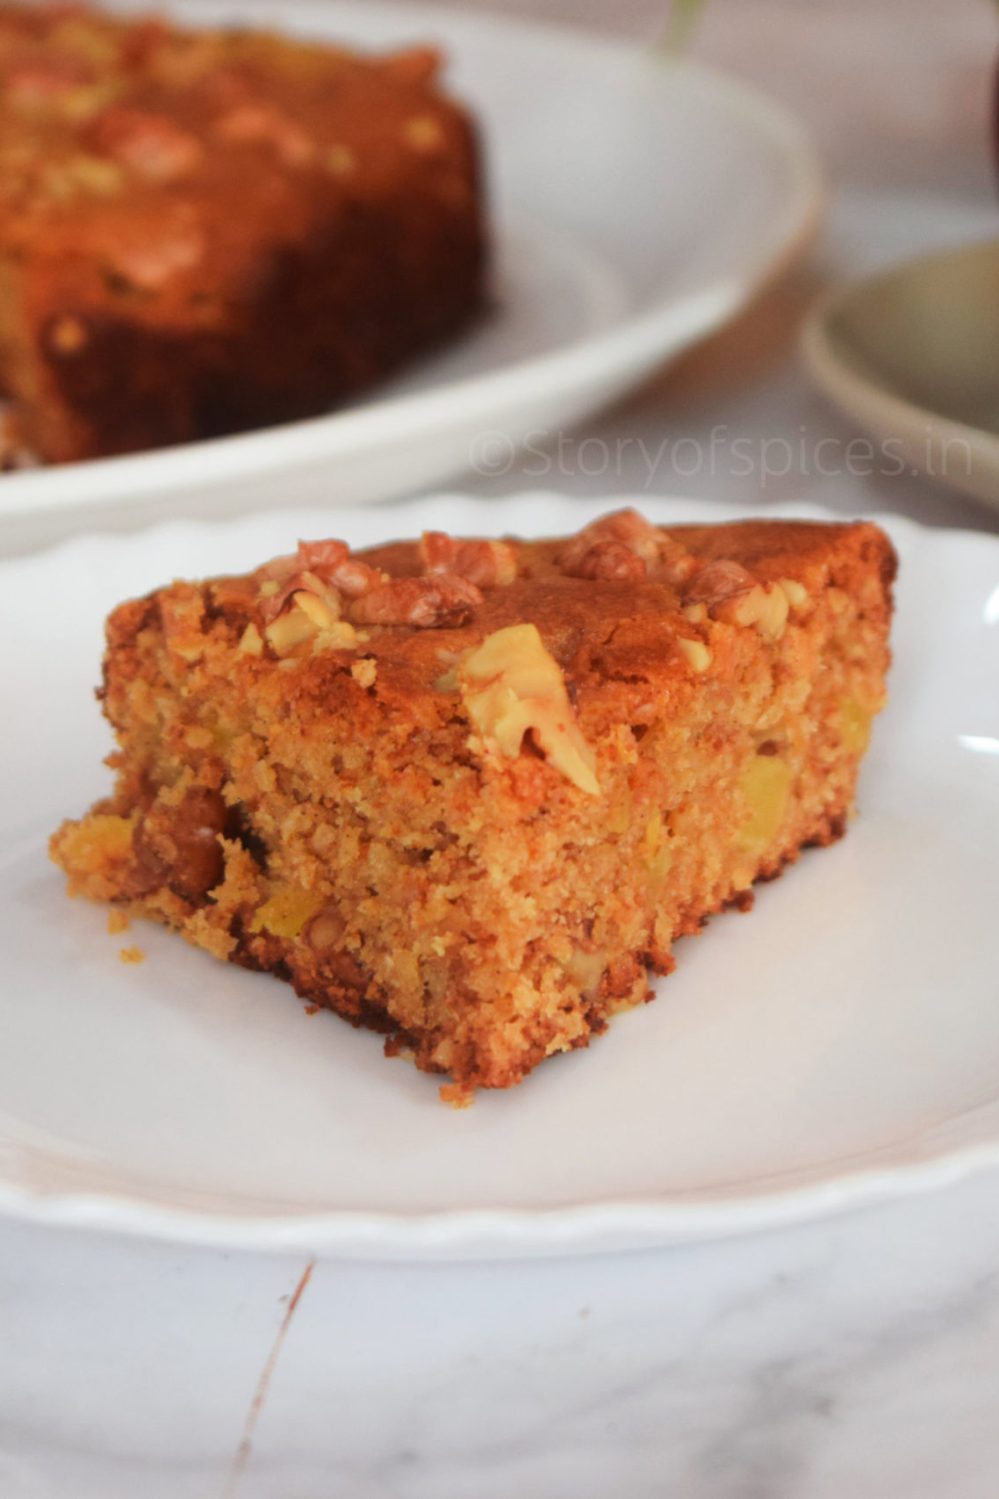 apple-oat-cake-recipe-story-of-spices .